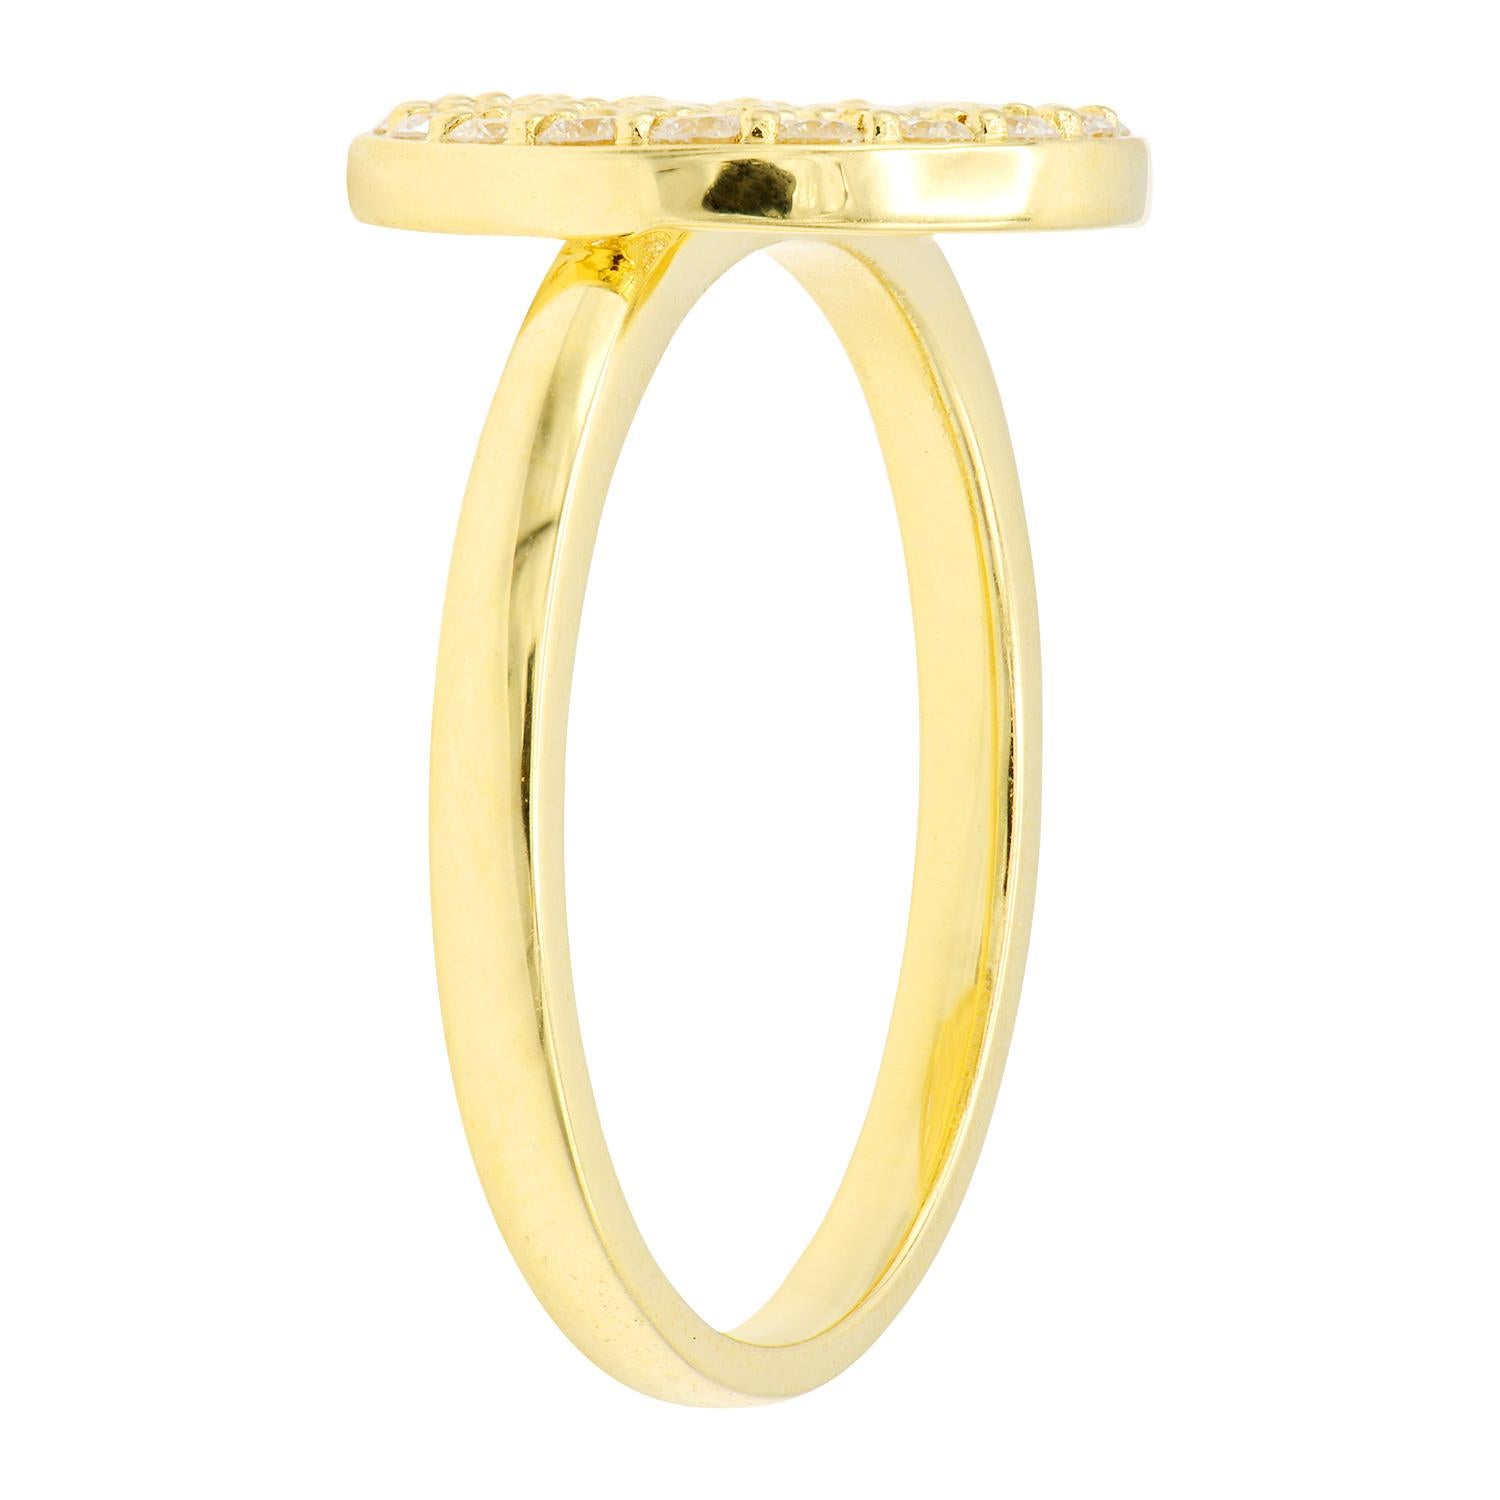 Attend an event and turn heads with this beautiful round diamond pave ring. This 14 karat yellow gold ring made from 2.7 grams of gold contains 37 round SI, H color diamonds totaling 0.63 carats. The diamonds are laid together in a circled shape,